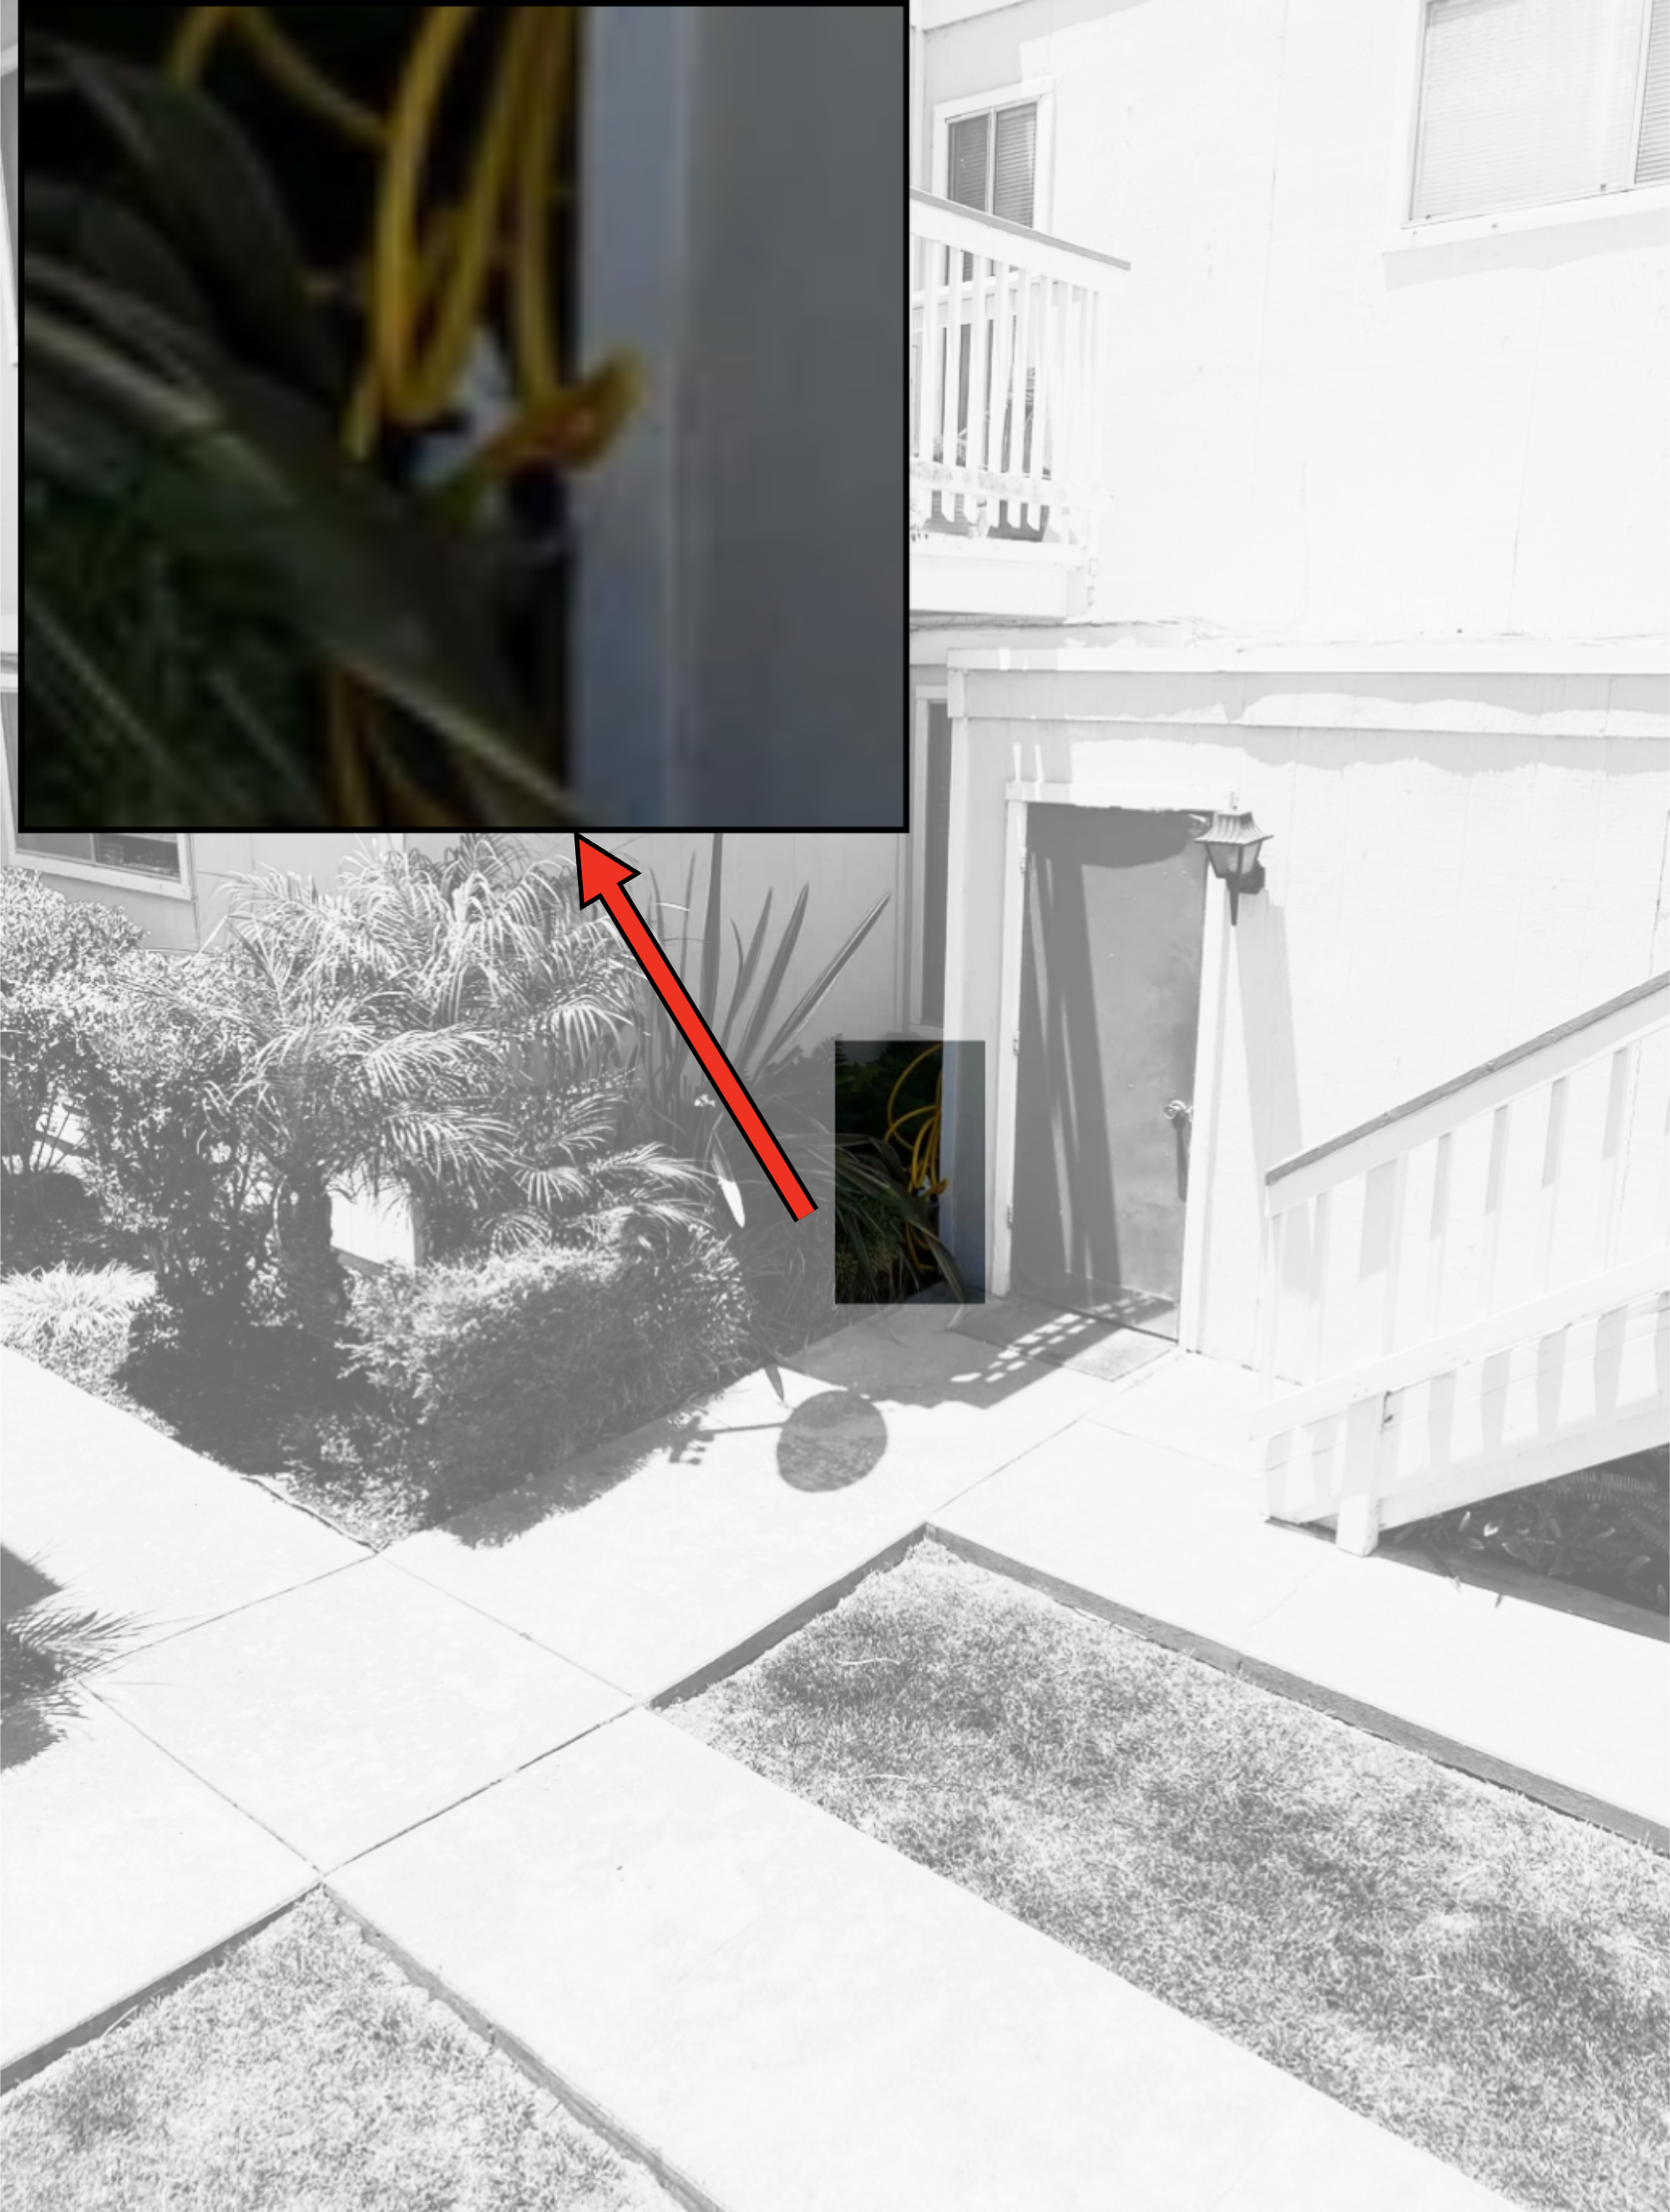 Image of a snake partially visible behind a structural column near a residential building&#x27;s entrance. Enlarged inset shows a close-up of the snake. No people present